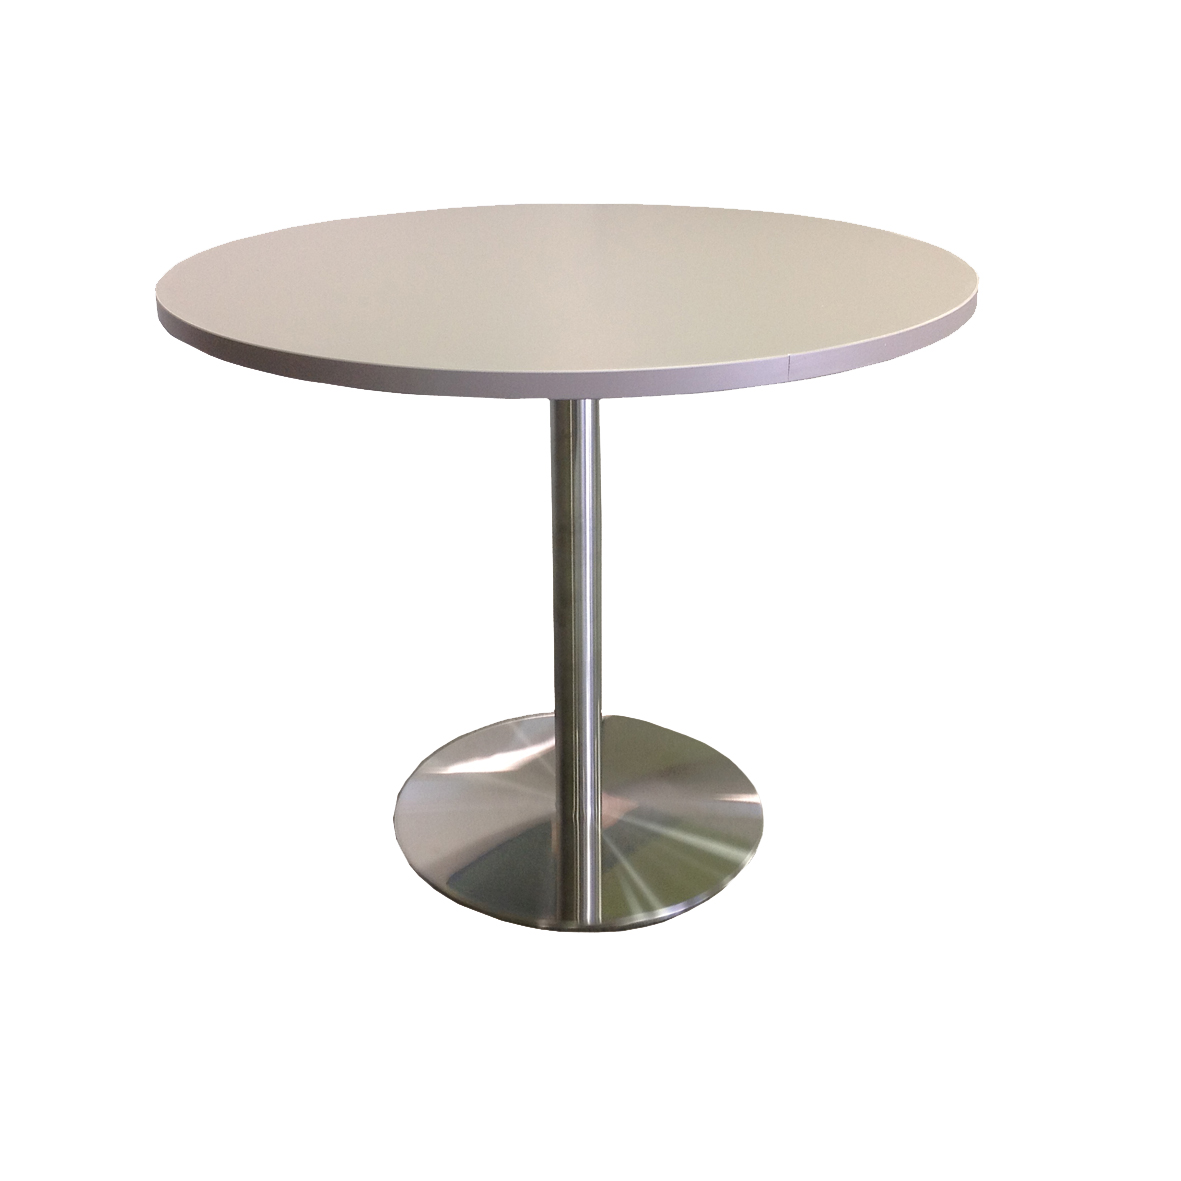 Orion 900mm round top table for staffrooms and office